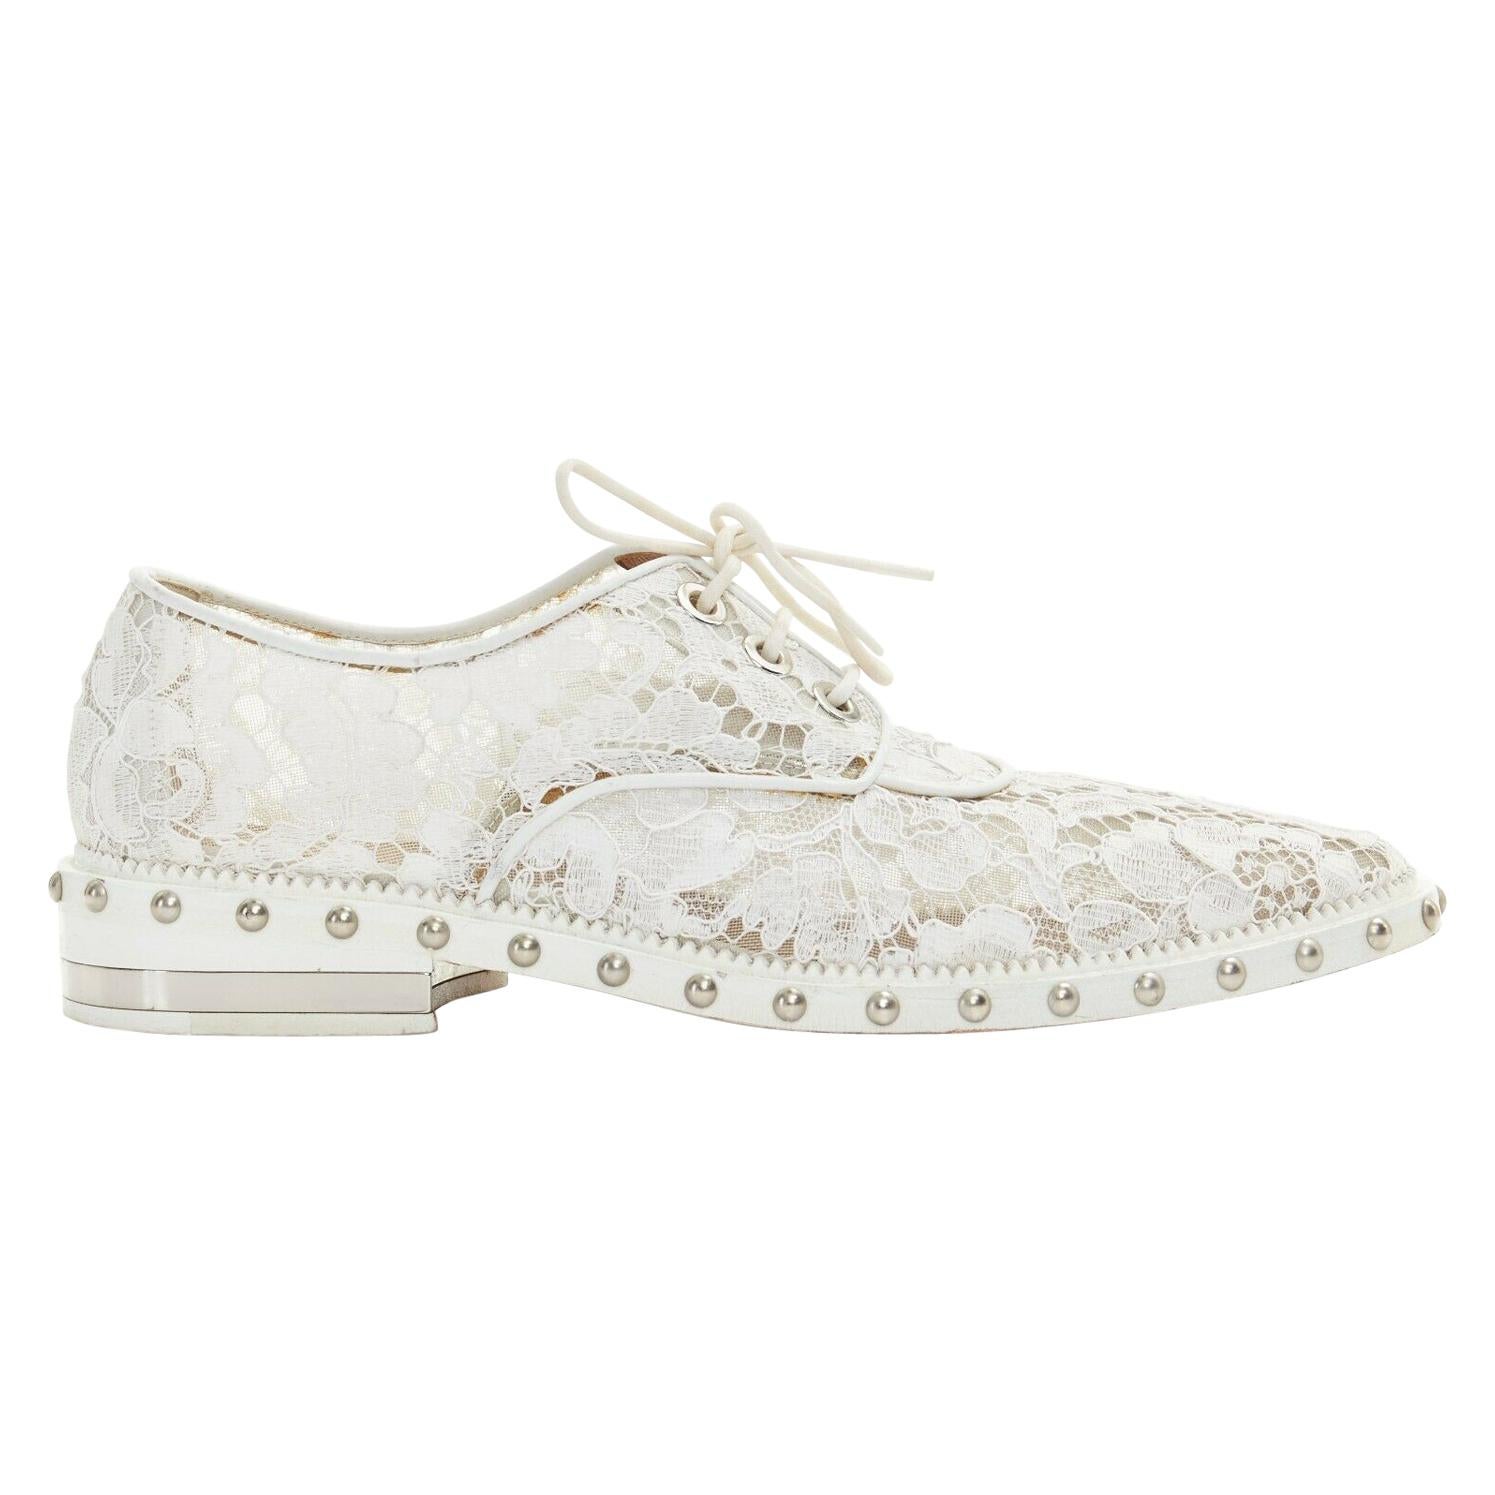 GIVENCHY TISCI white floral lace mesh silver stud outsole lace up brogue EU39